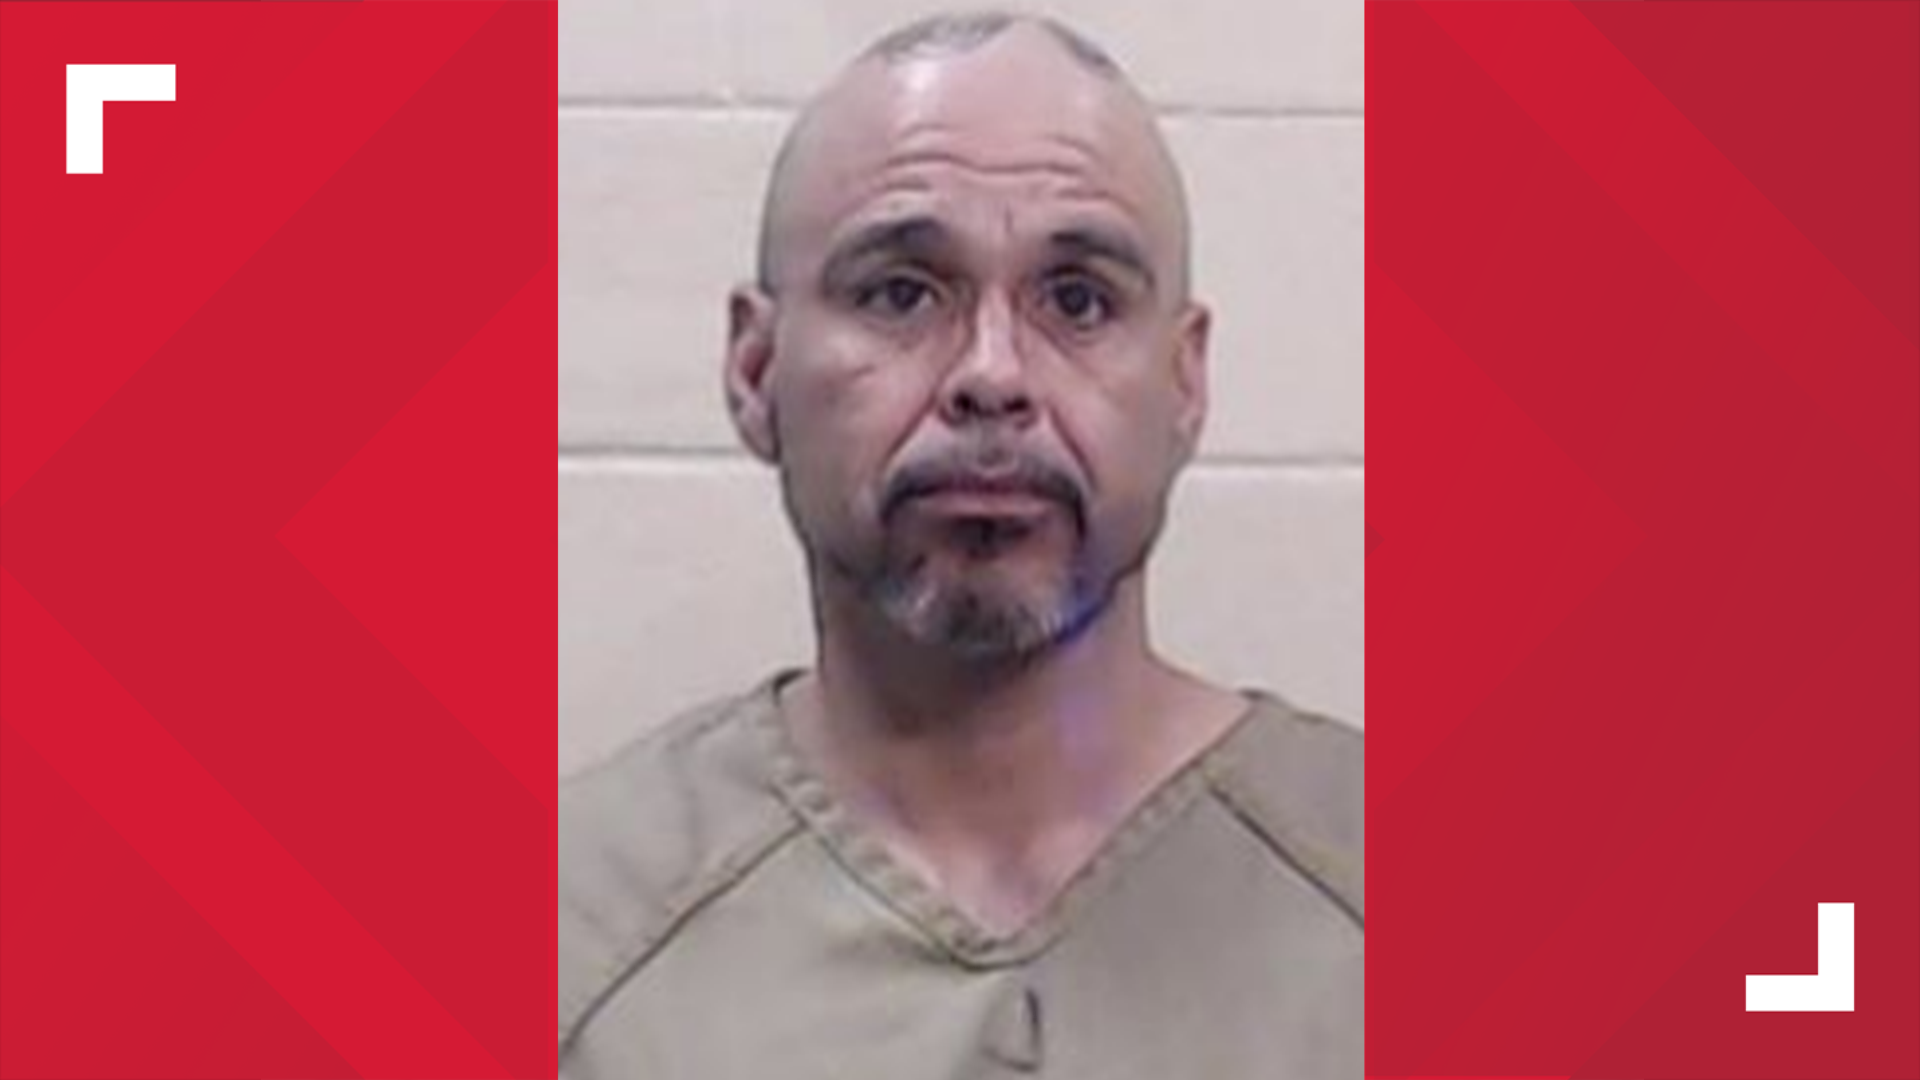 43-year-old Robert Serrano Franco has been taken into custody and was charged with four counts of aggravated assault against a peace officer.